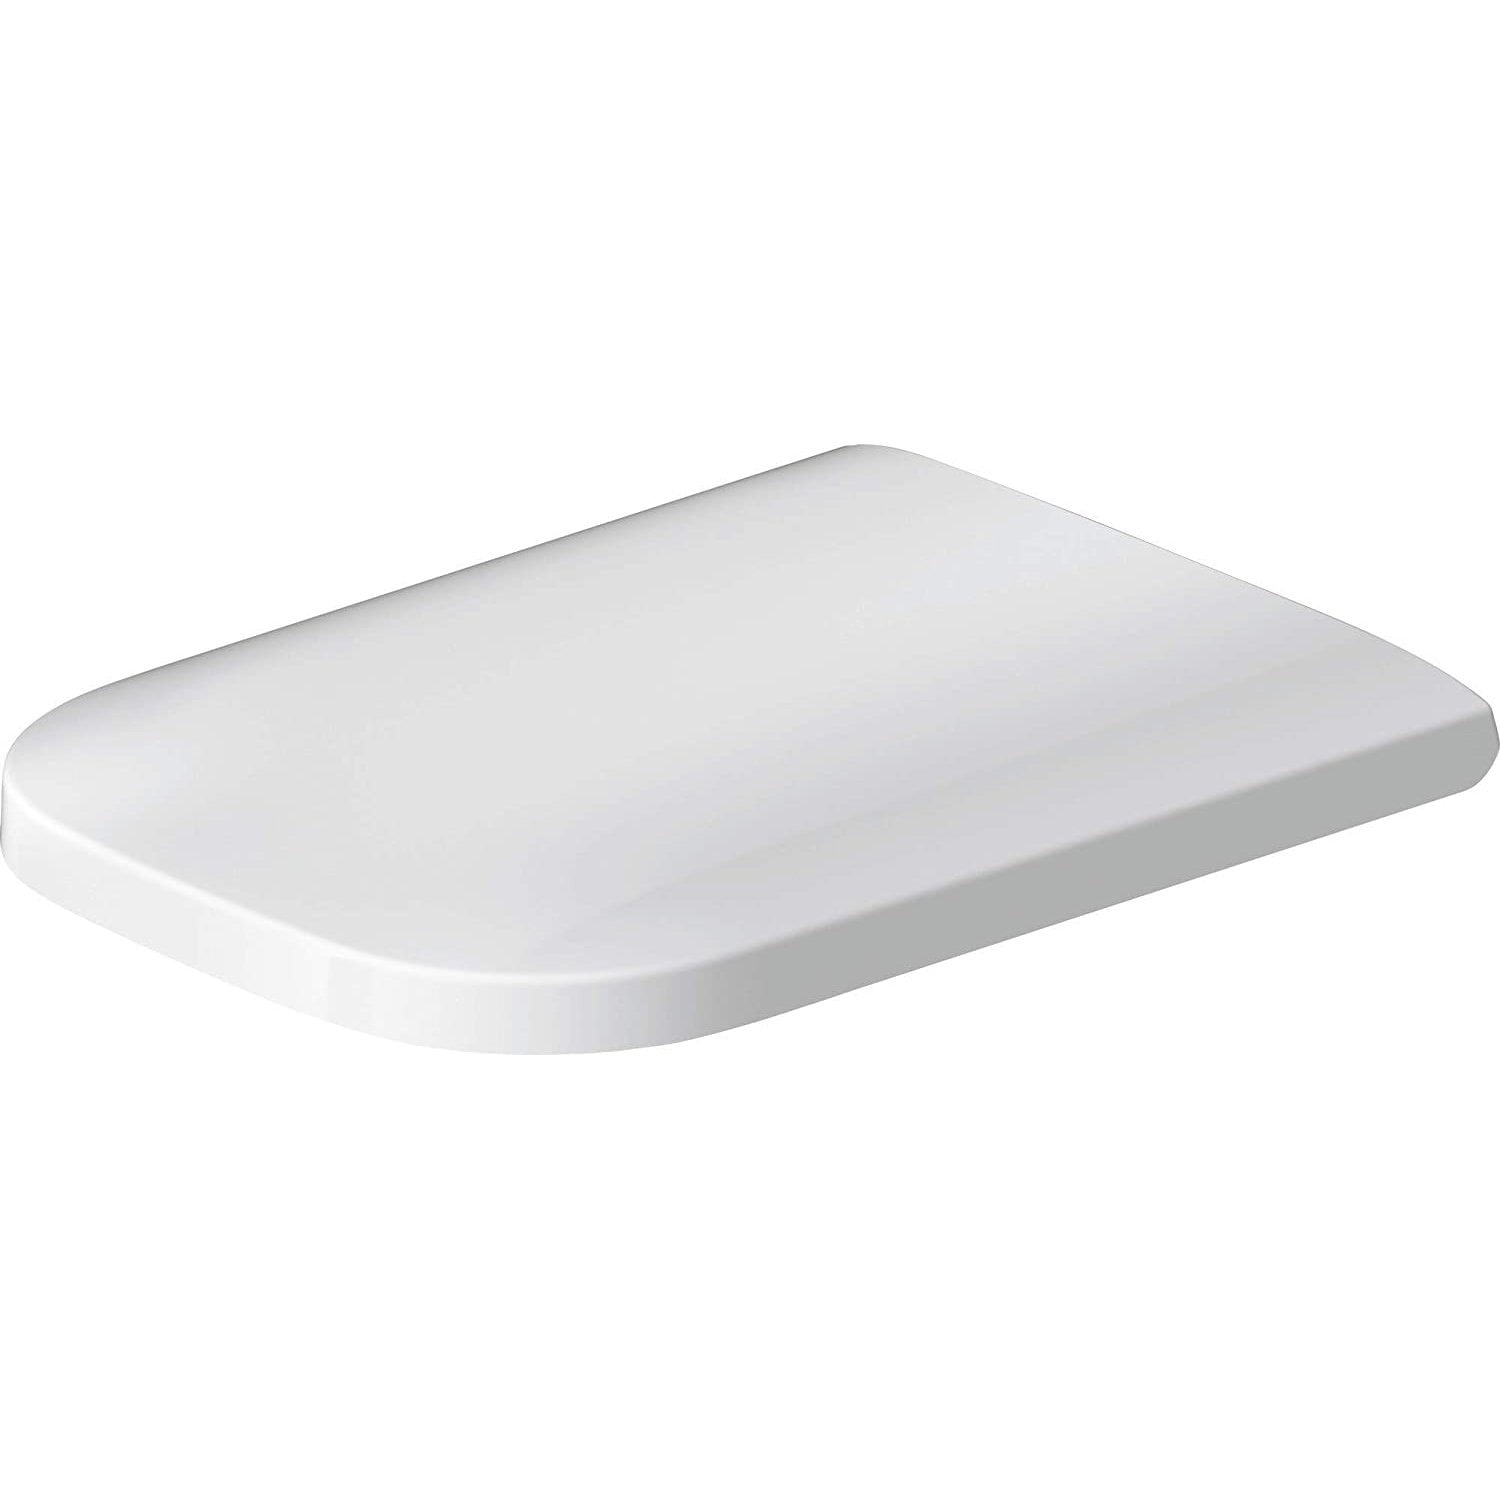 0064690099 D2 Toilet Seat & Cover With Hinge, White